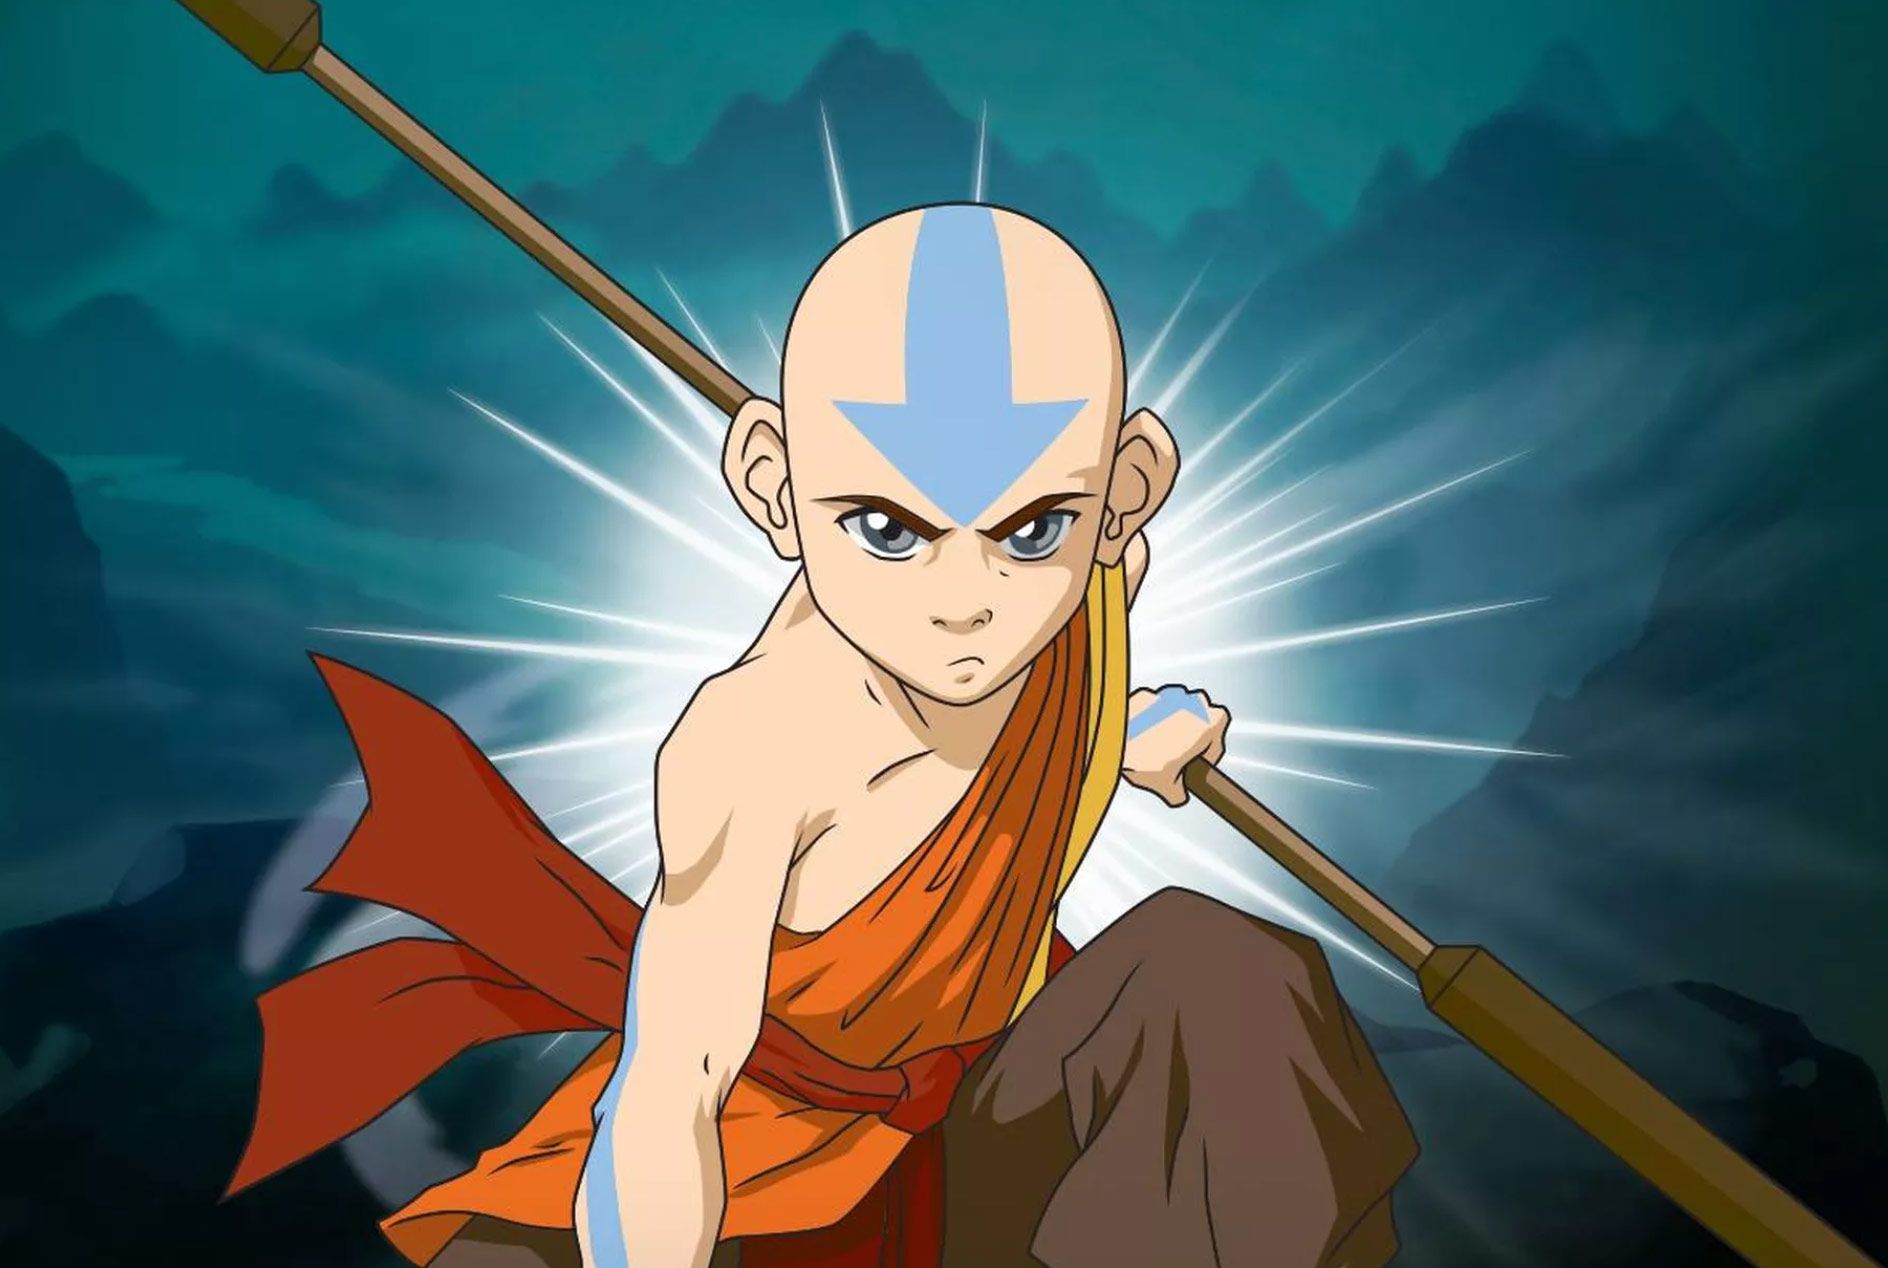 Avatar The Last Airbender liveaction Netflix remake shares first look at  characters